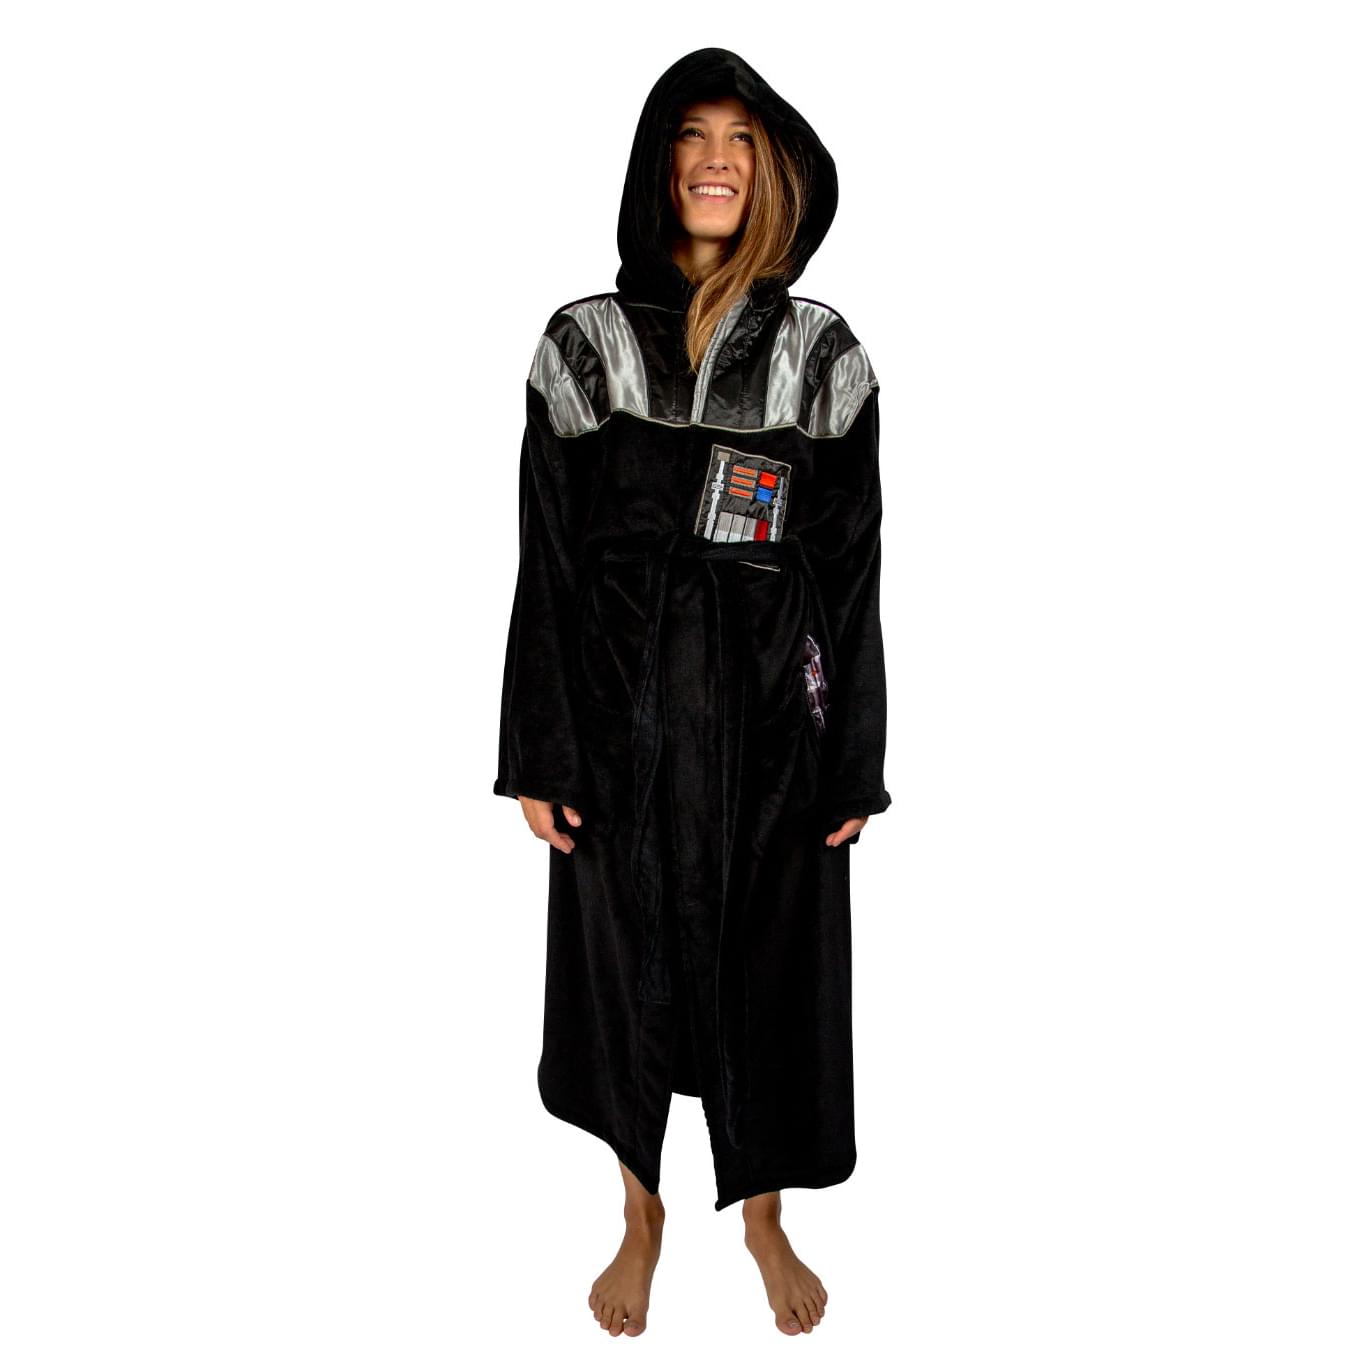 Star Wars Darth Vader Hooded Bathrobe For Men/Women , One Size Fits Most Adults